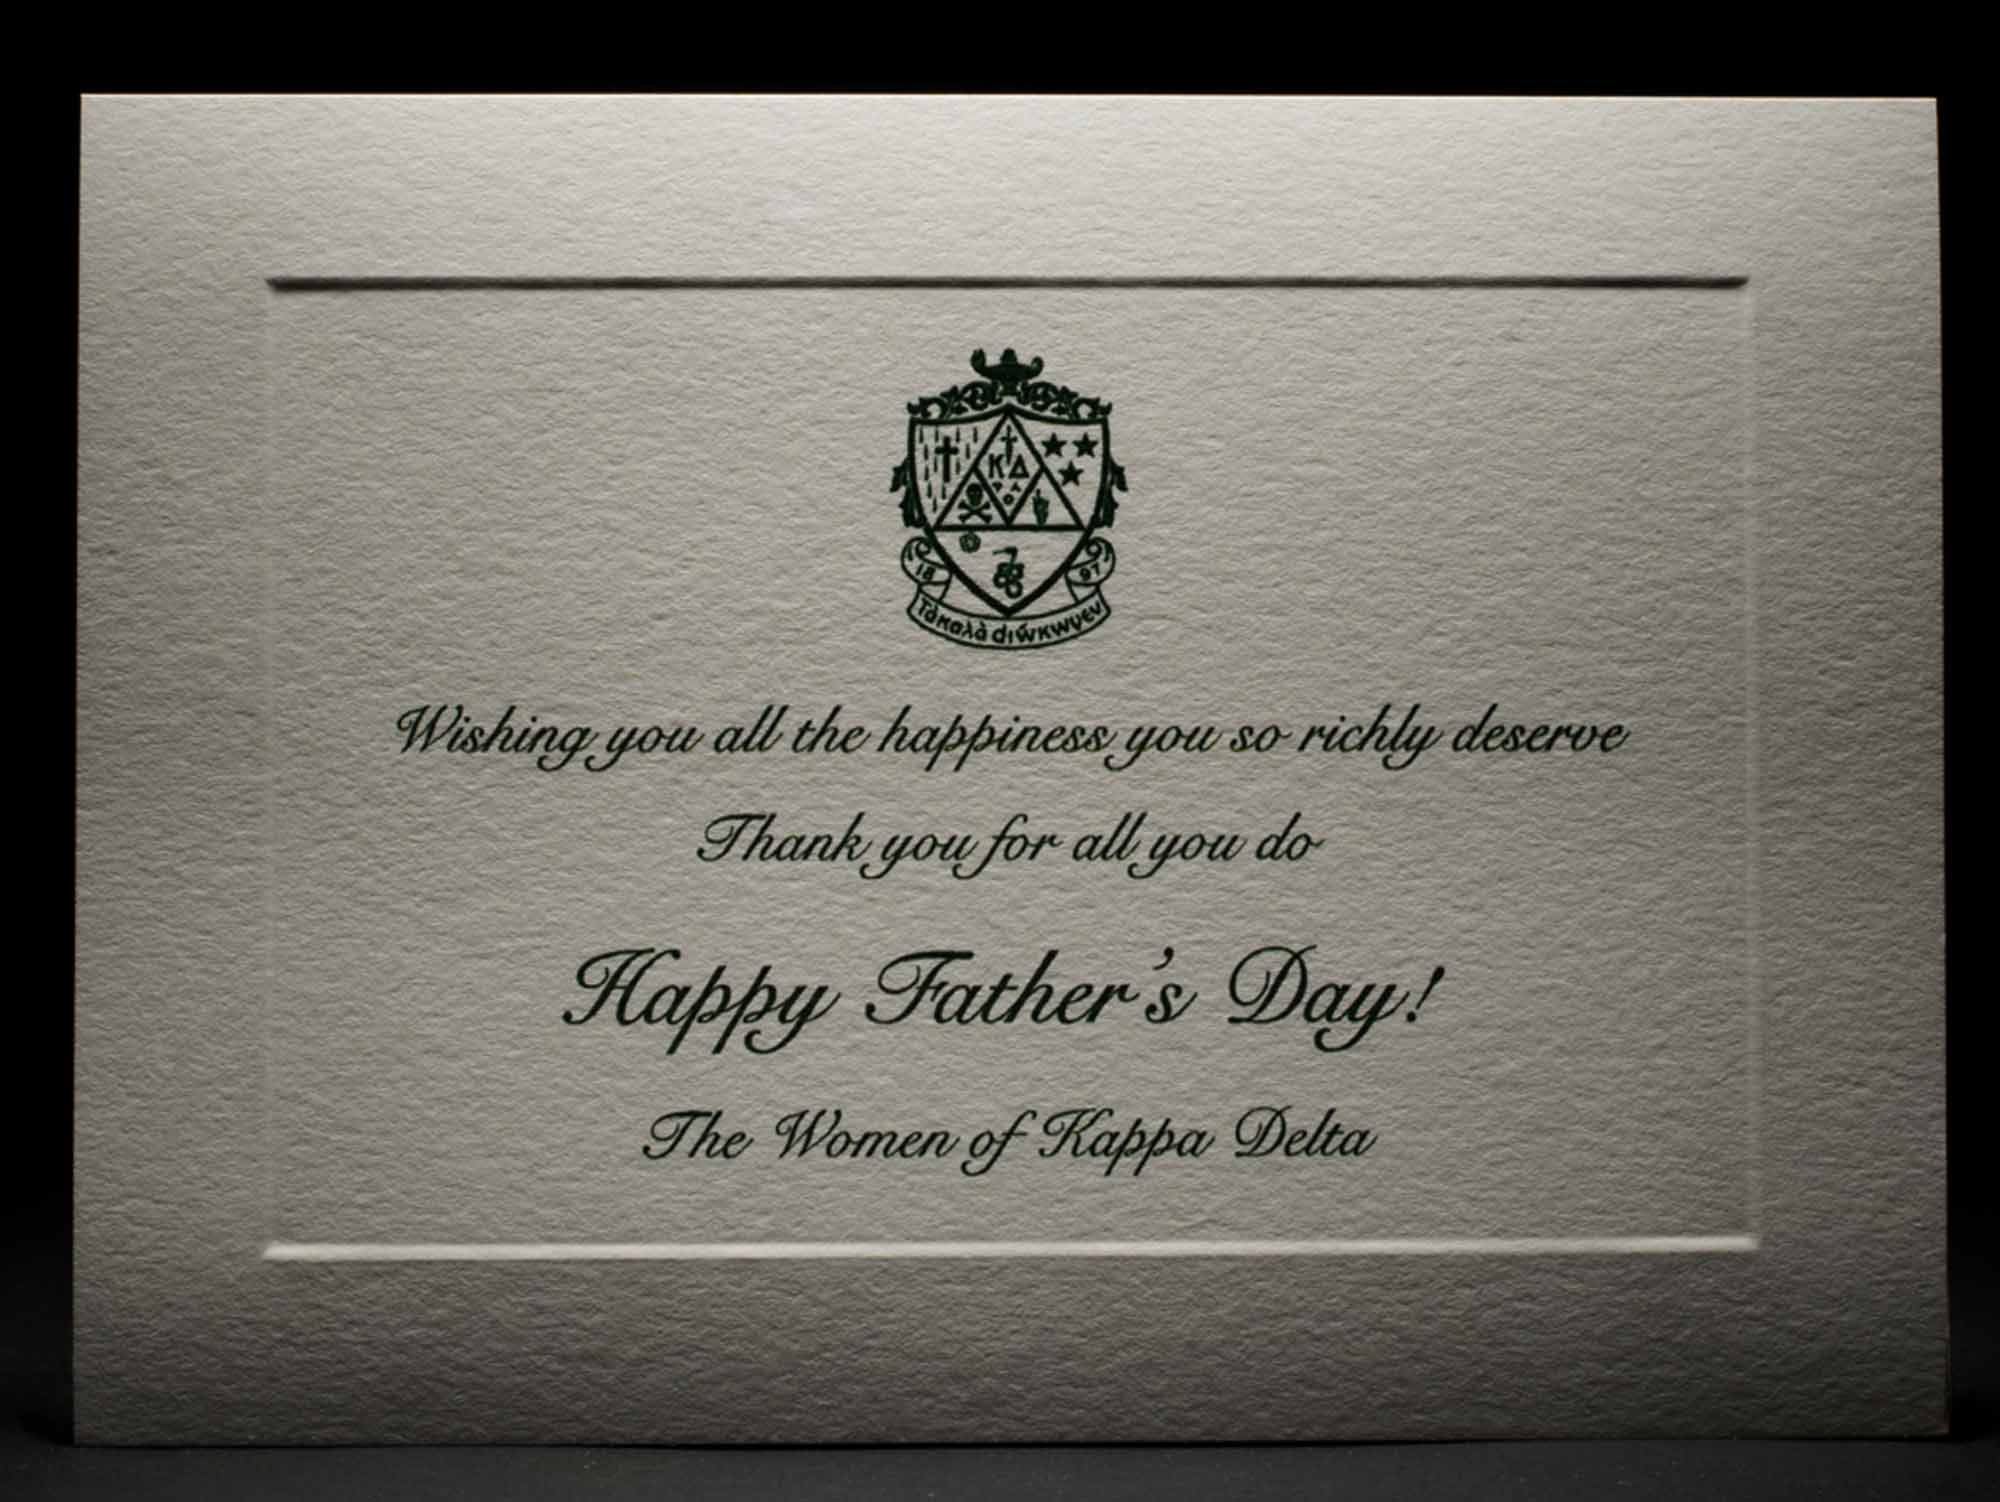 Father’s Day Cards Kappa Delta